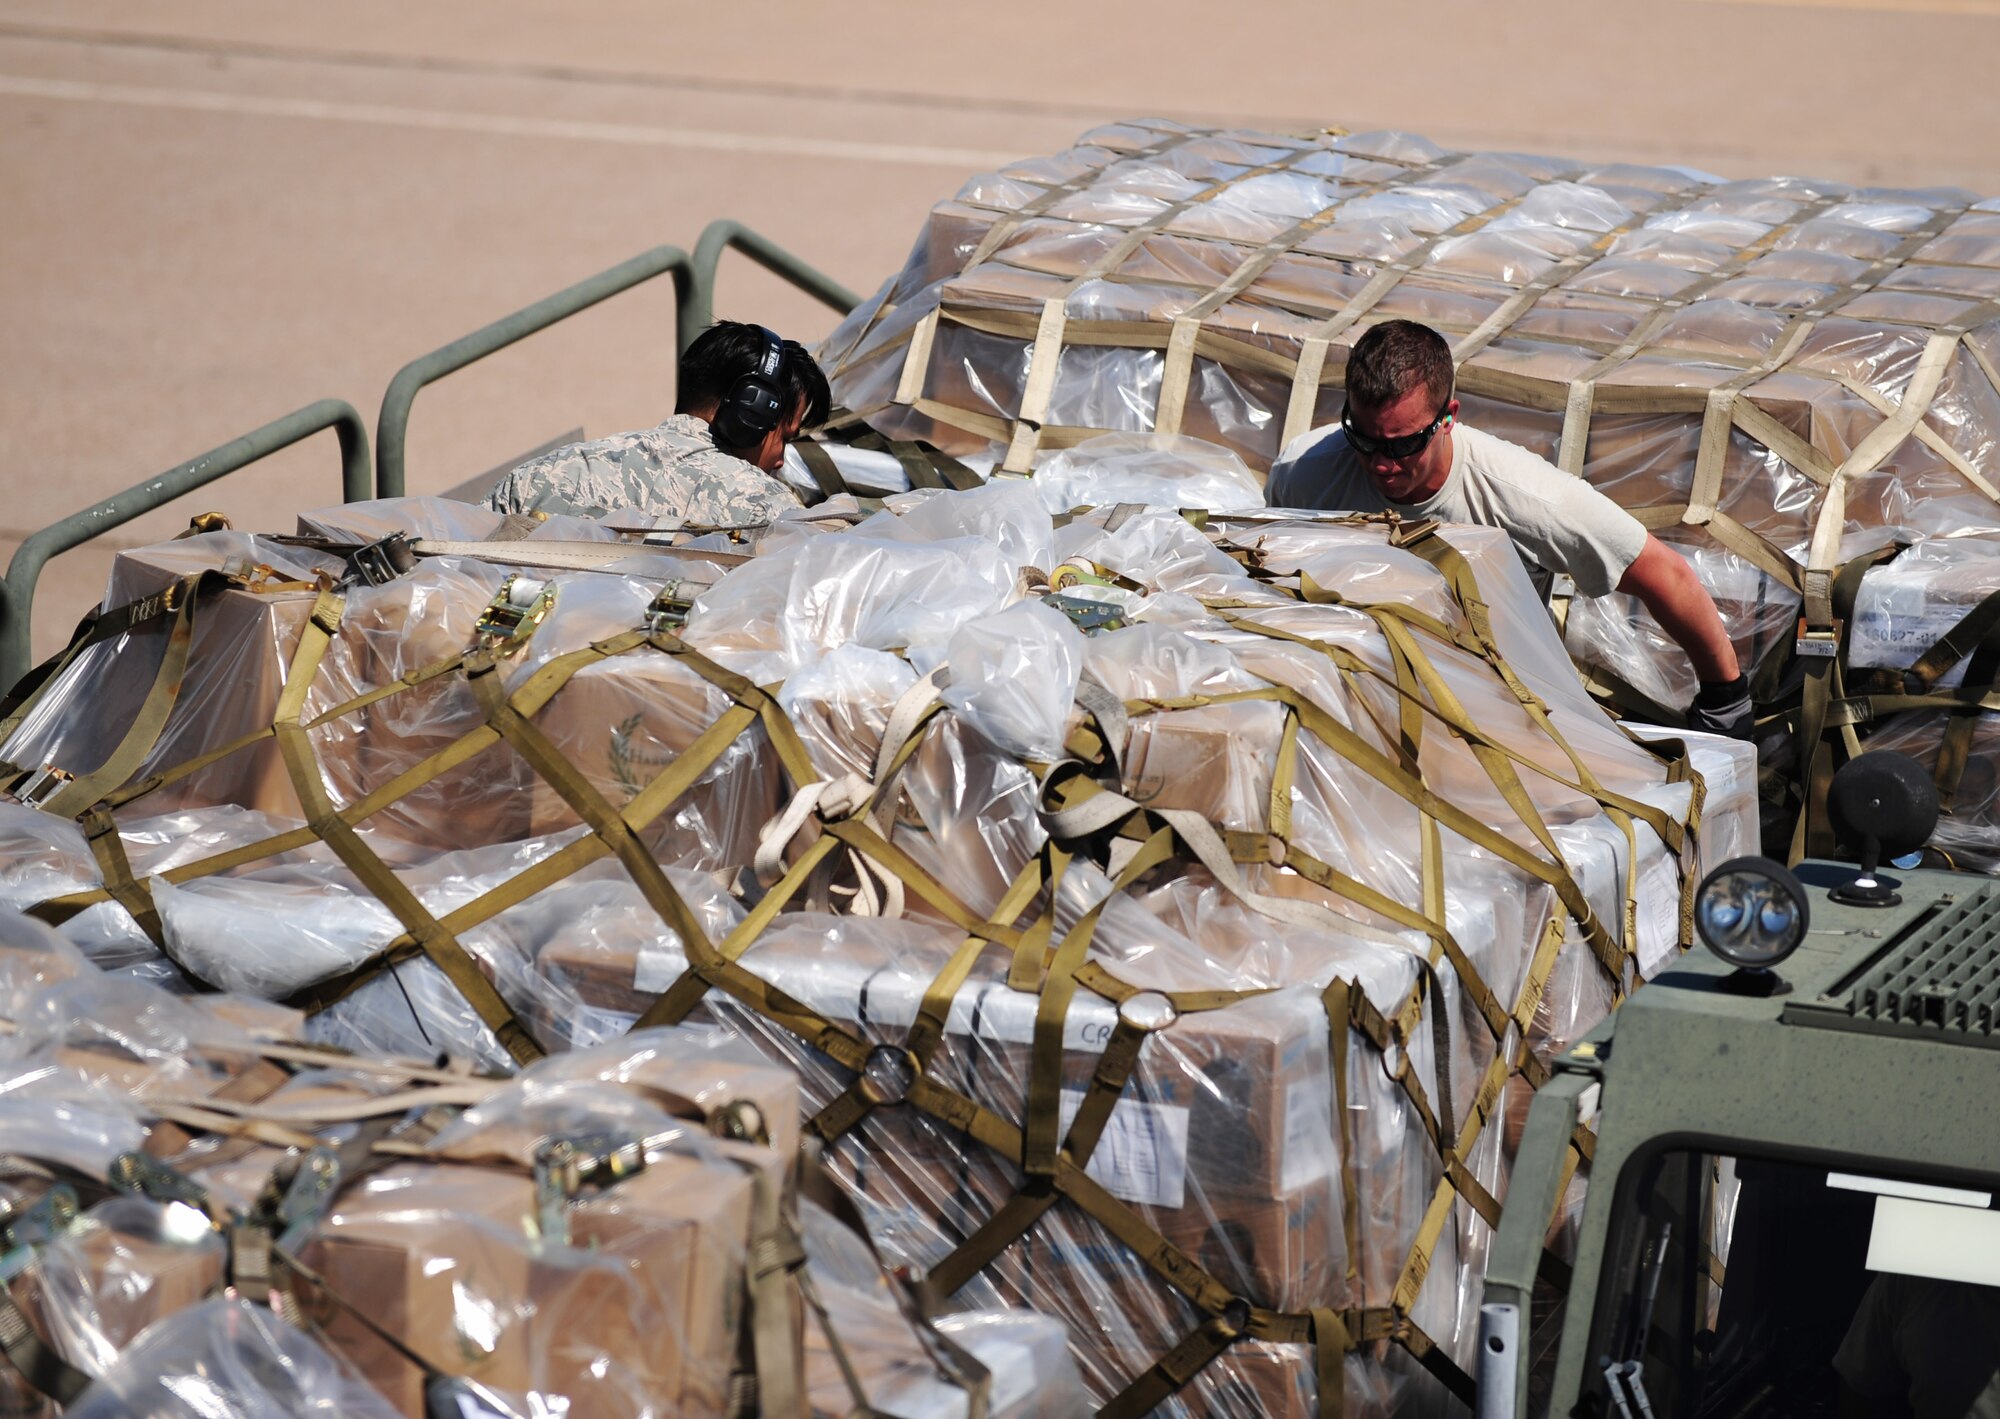 U.S. Air Force Senior Airman Brian Ho, left, and Staff Sgt. Eric Hazelwood, 7th Logistics Readiness Squadron air transportation specialists, push Global Samaritan Resources’ pallets of food onto a vehicle at Dyess Air Force Base, Texas, Sept. 20, 2016. When the shipment arrives at its location, the Barzani Charity Foundation will pick it up and distribute it to Iraqi refugees. (U.S. Air Force photo by Airman 1st Class April Lancto)